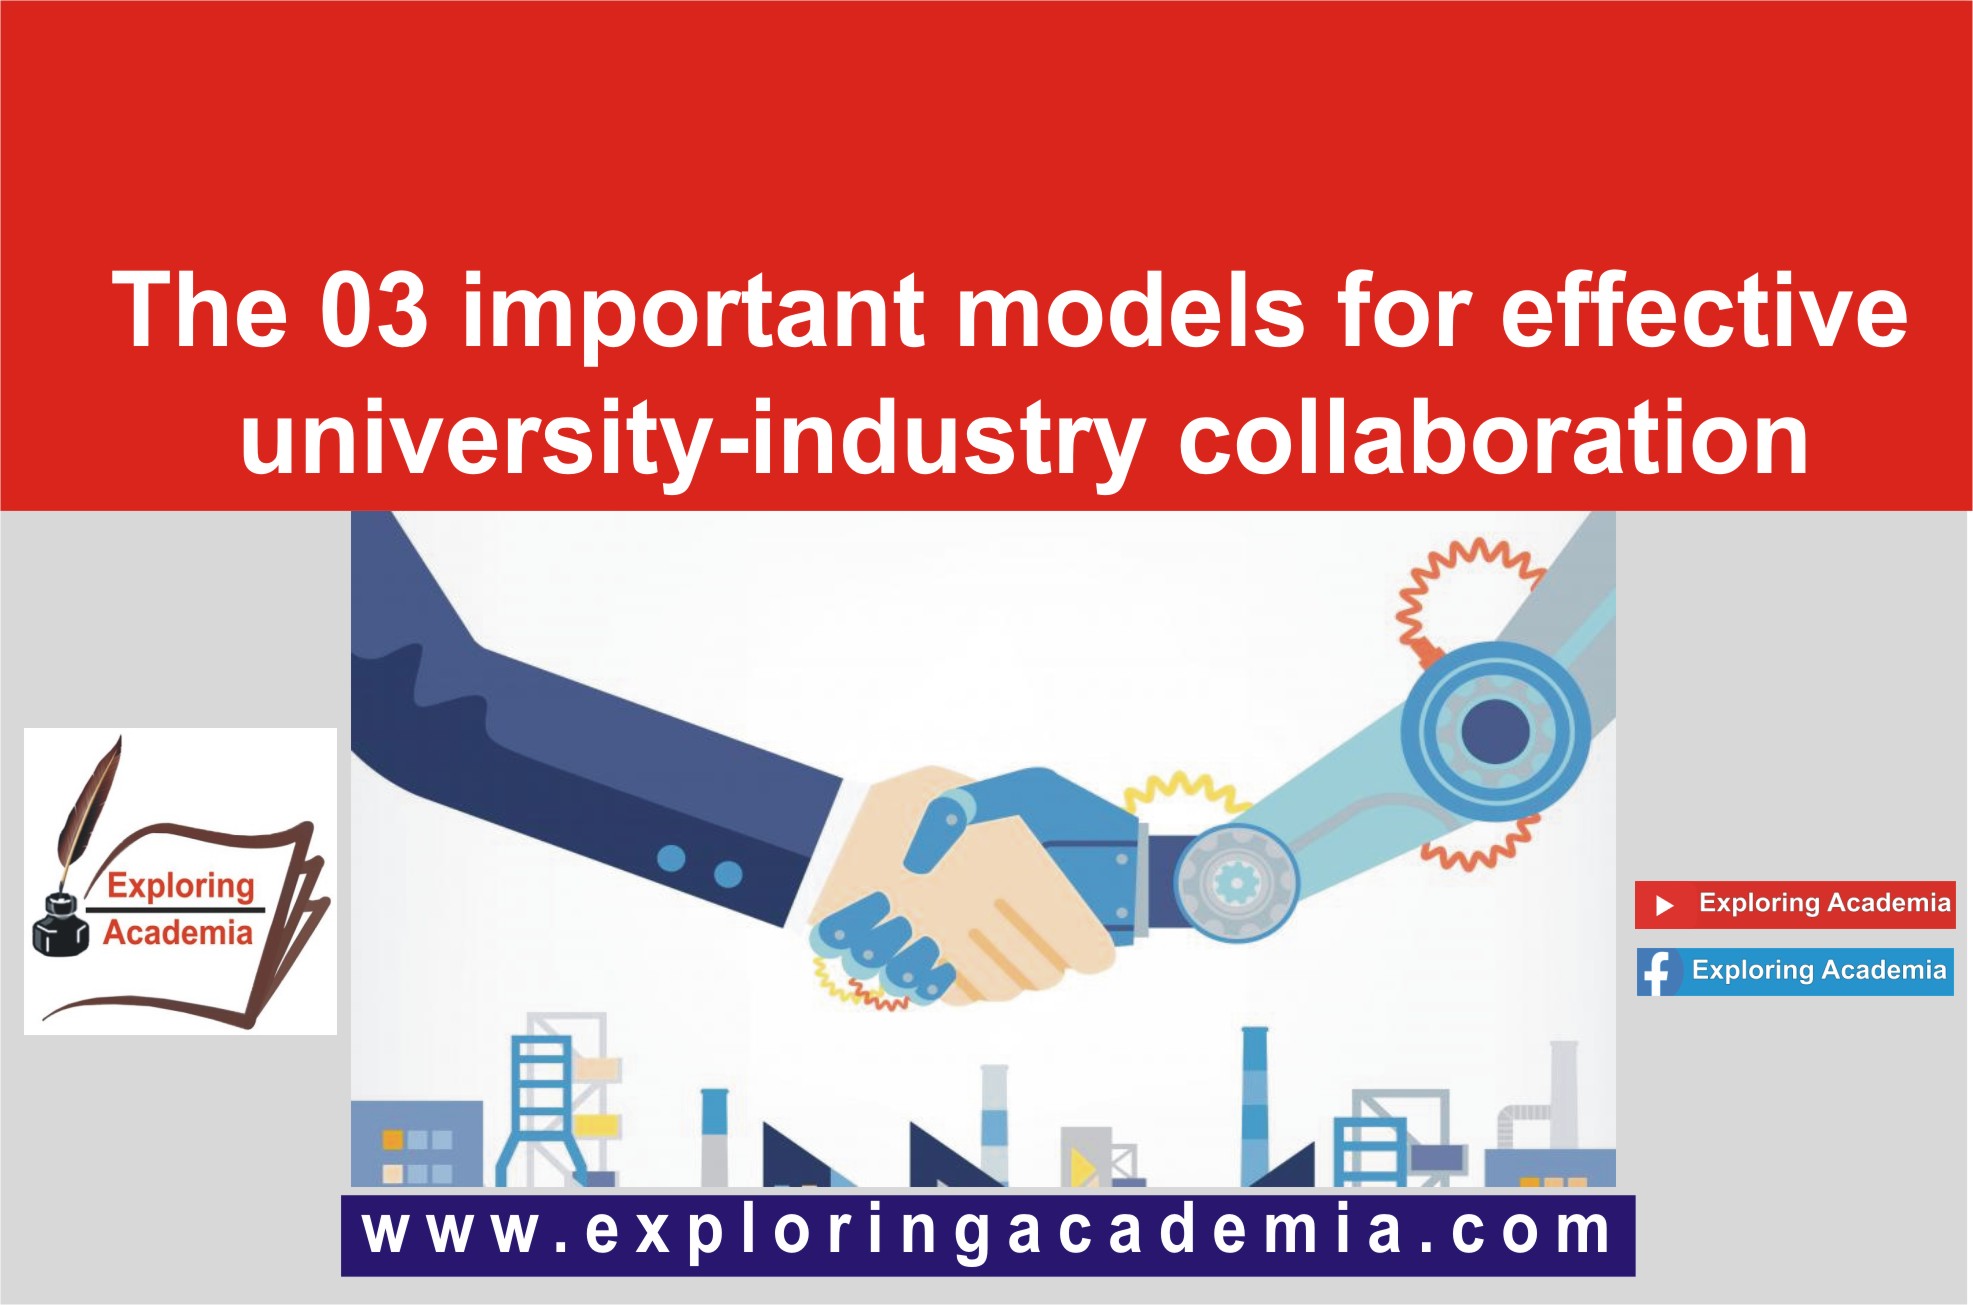 The 03 important models for effective university-industry collaboration